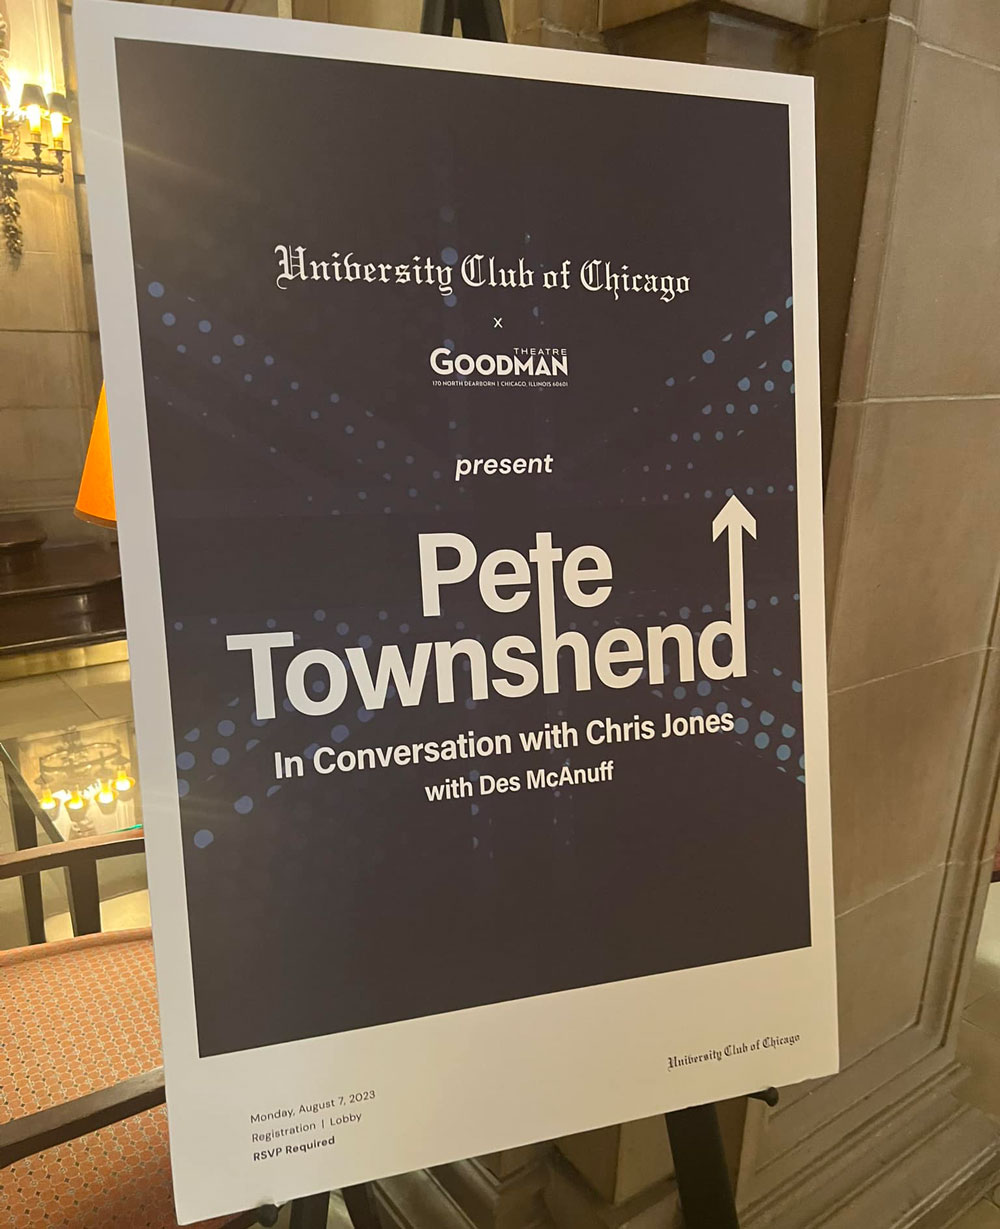 Pete Townshend at University Club of Chicago